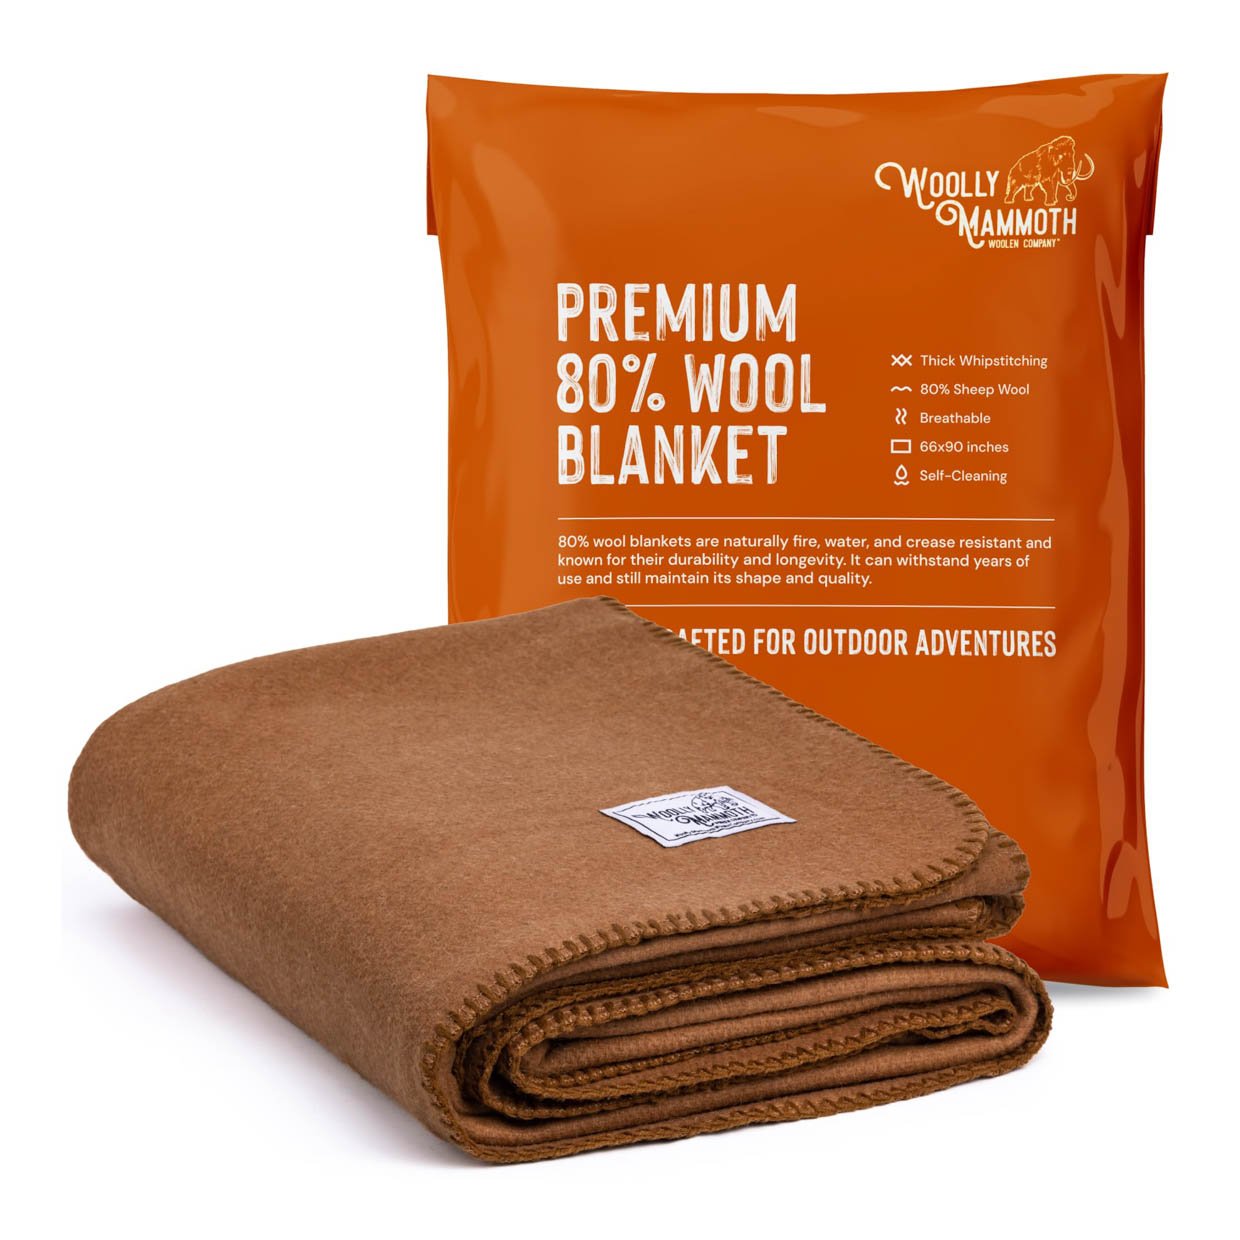 Woolly Mammoth Camping Blanket